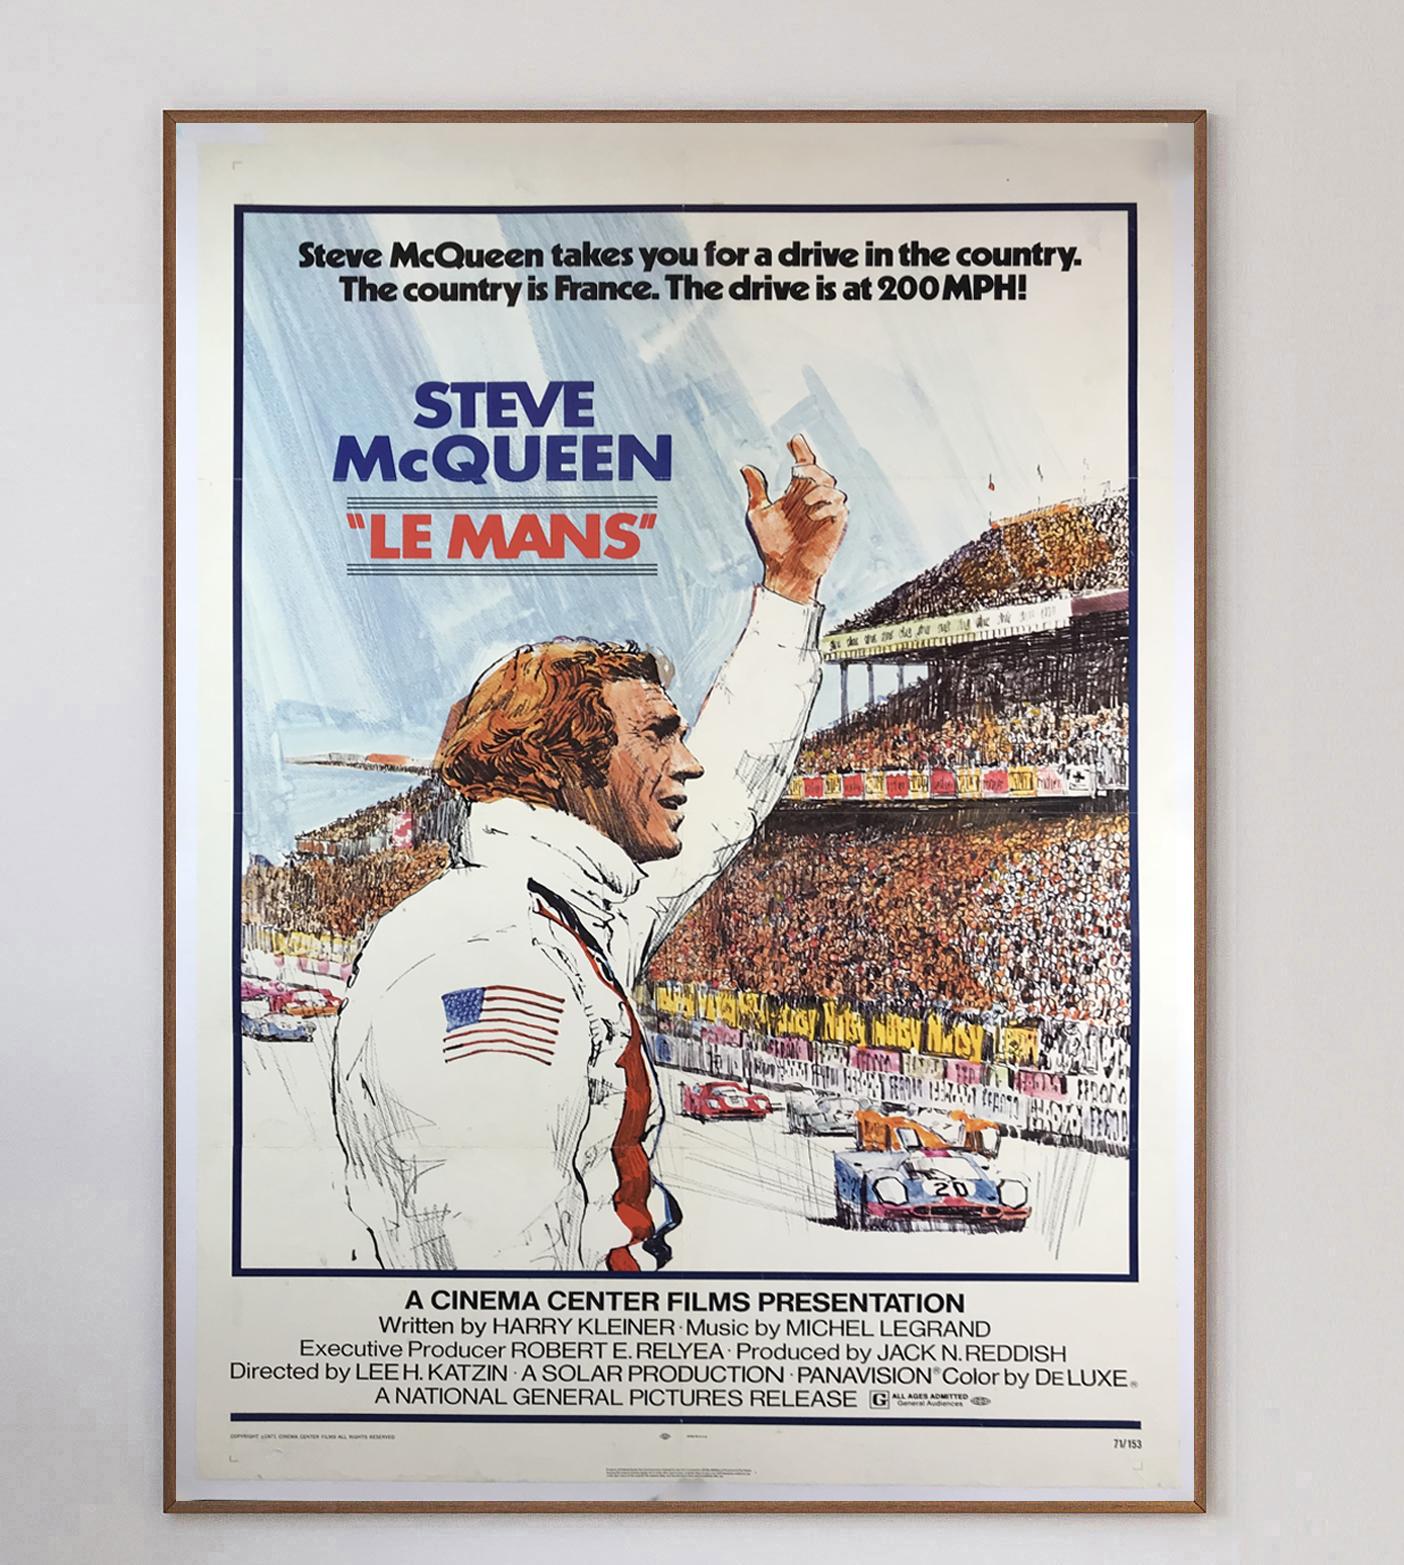 Featuring real-life footage from the 1970 race, Le Mans was released in 1971 starring the iconic Steve McQueen driving Gulf Porsche 917K. 24 Heures du Mans, or Le Mans 24 Hours is the oldest active car sports race in the world, with the winner